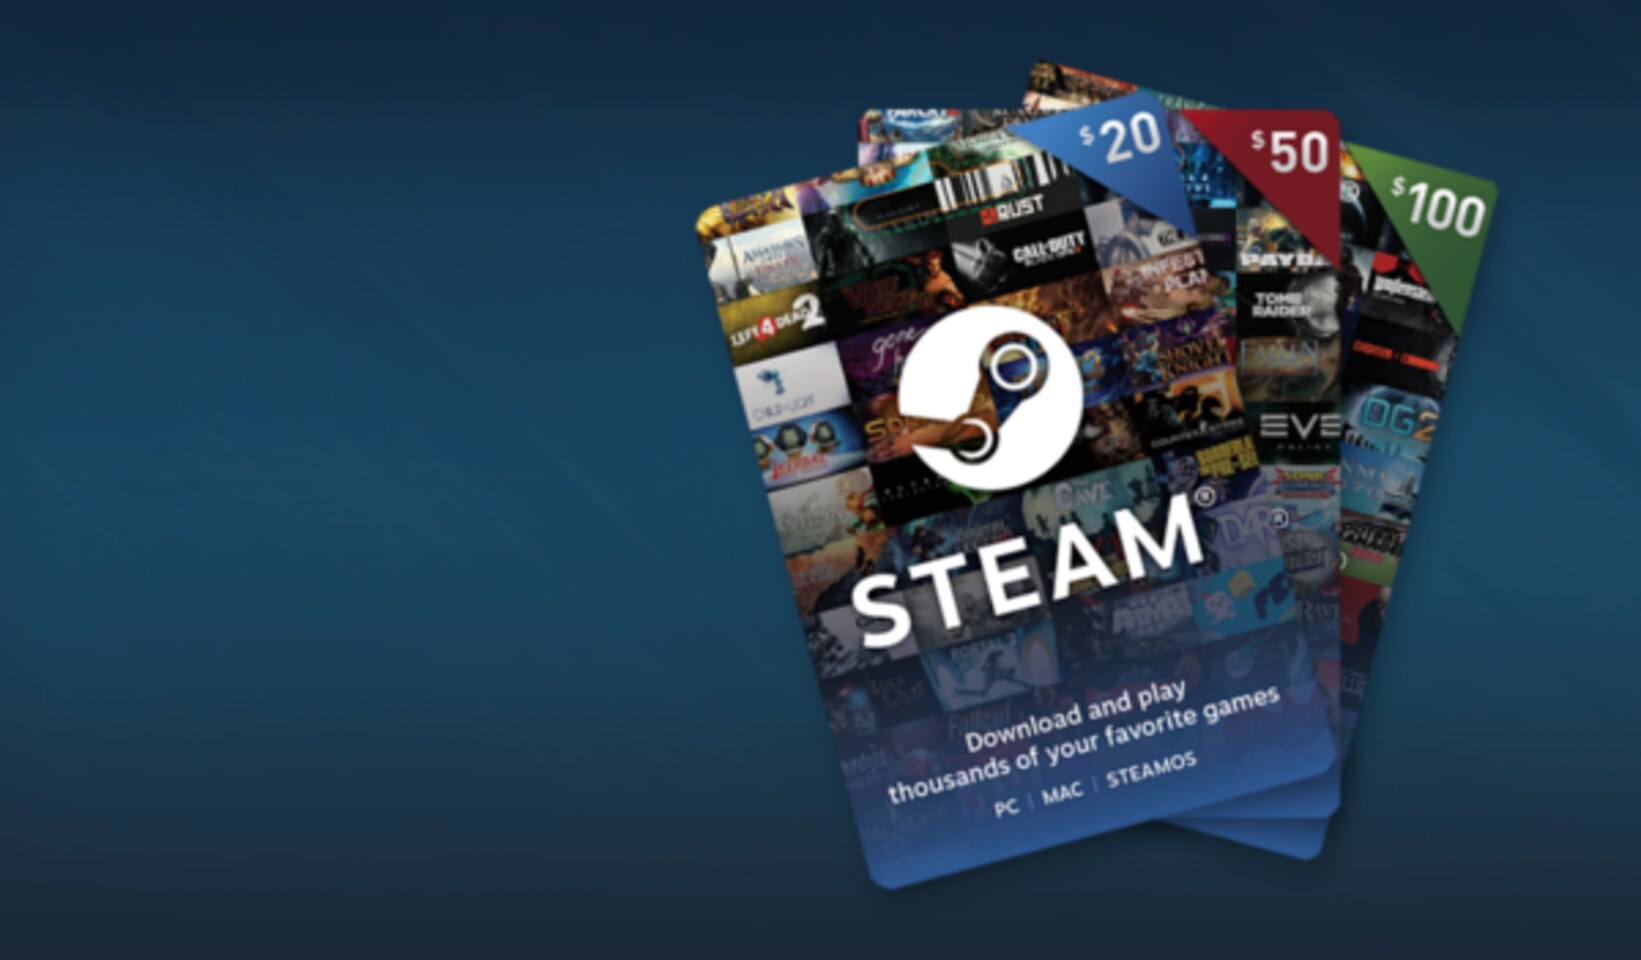 Steam cheaper Buy Card USD 20 - Gift on